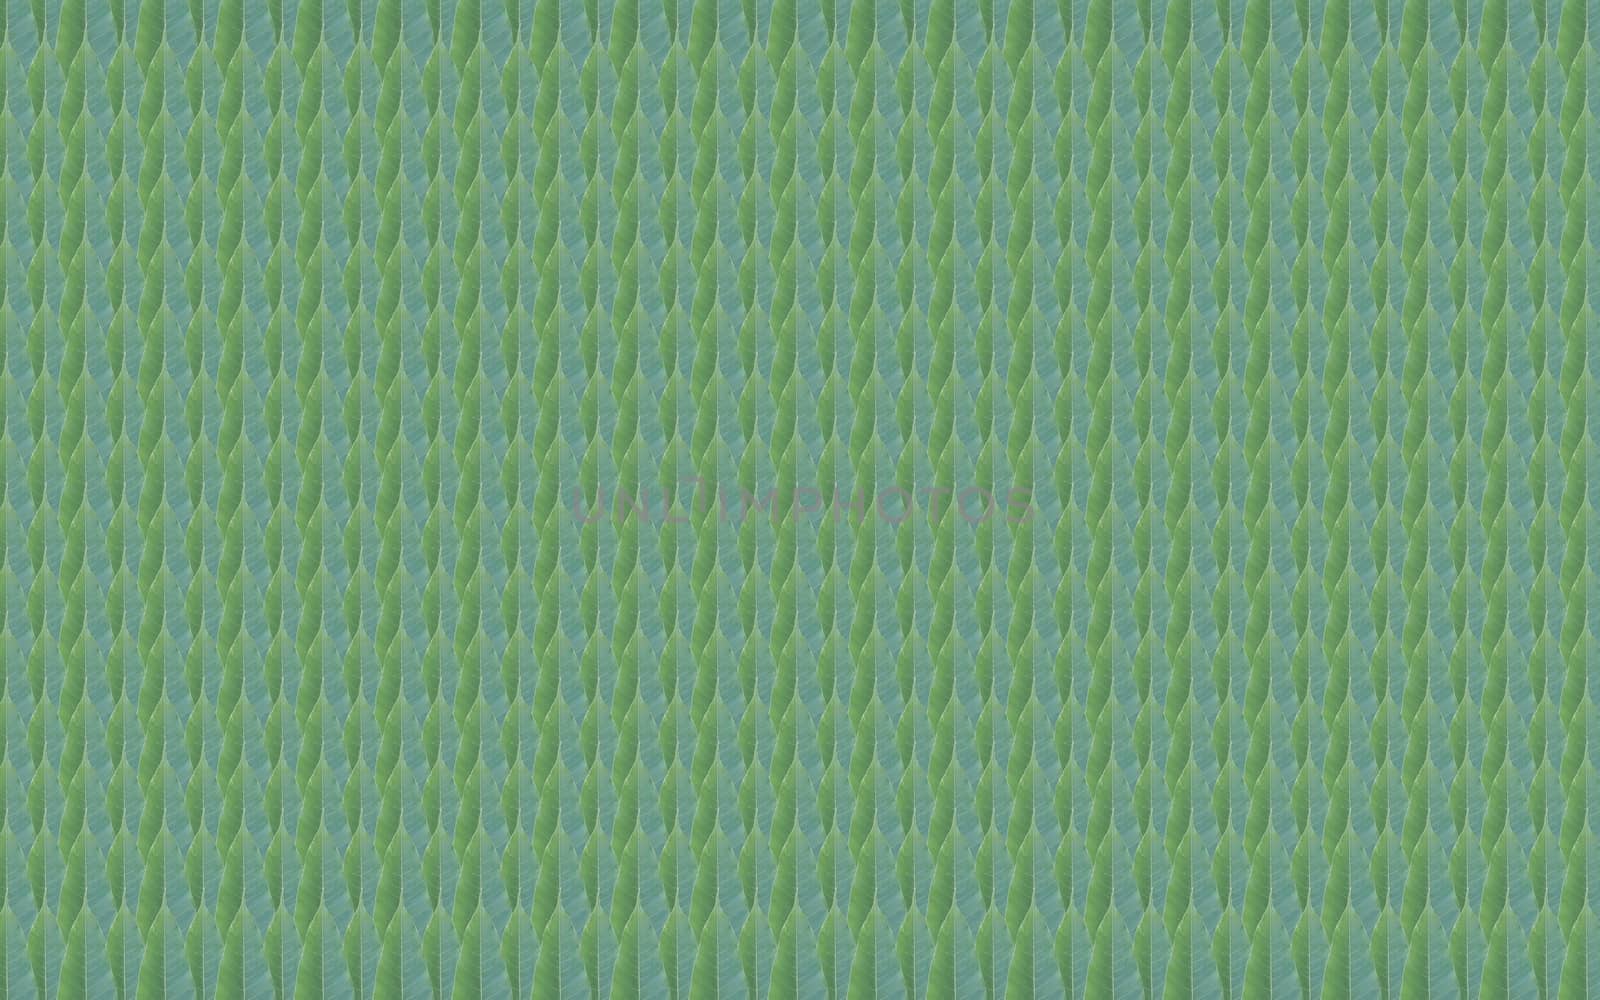 background made of fresh green leaf pattern by a3701027